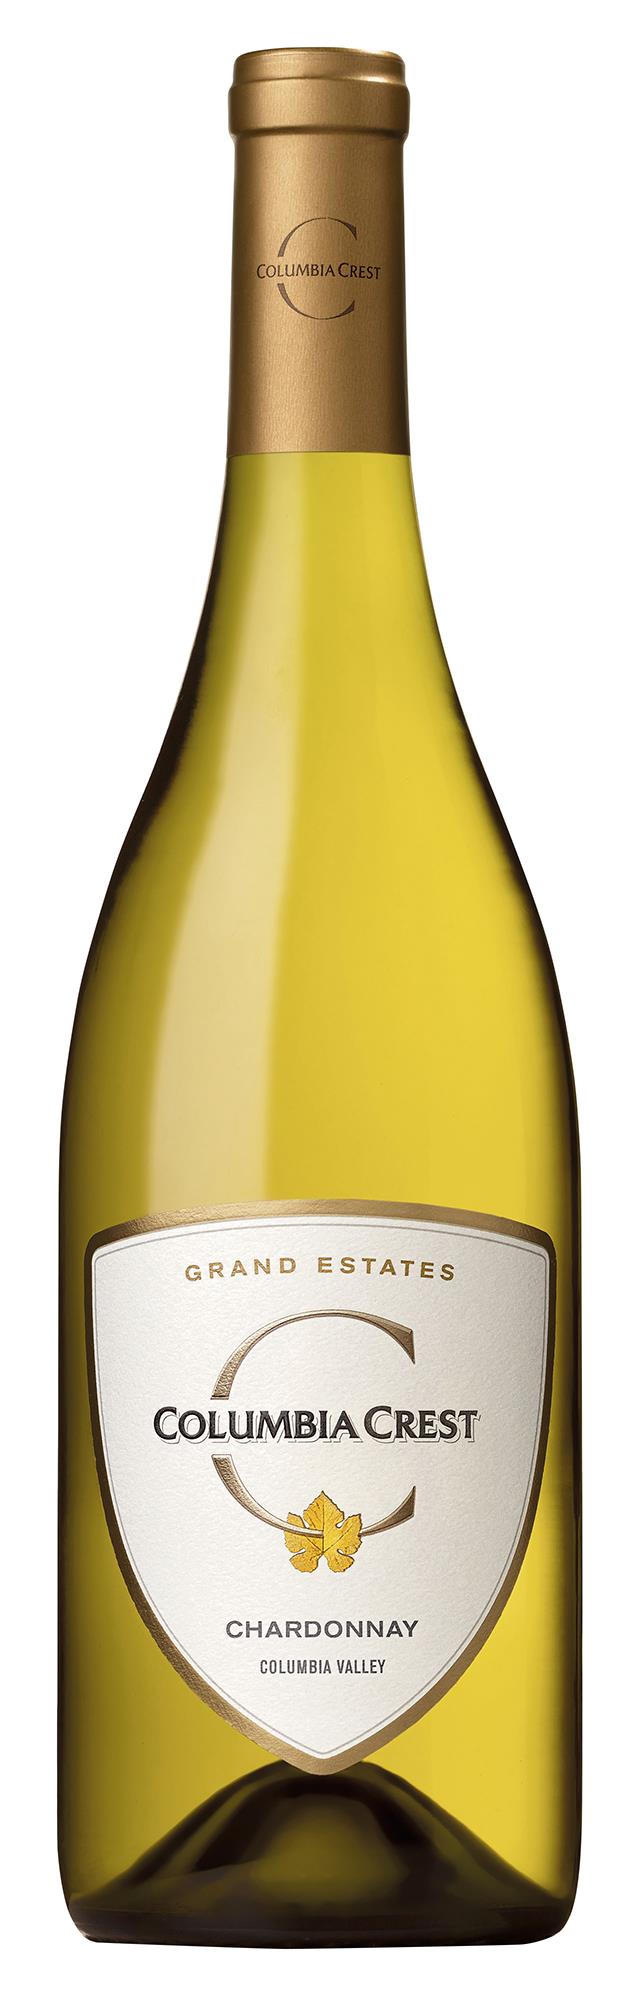  COLUMBIA CREST CHARDONNAY OAKED GRAND EST. COLUMBIA VALLEY,